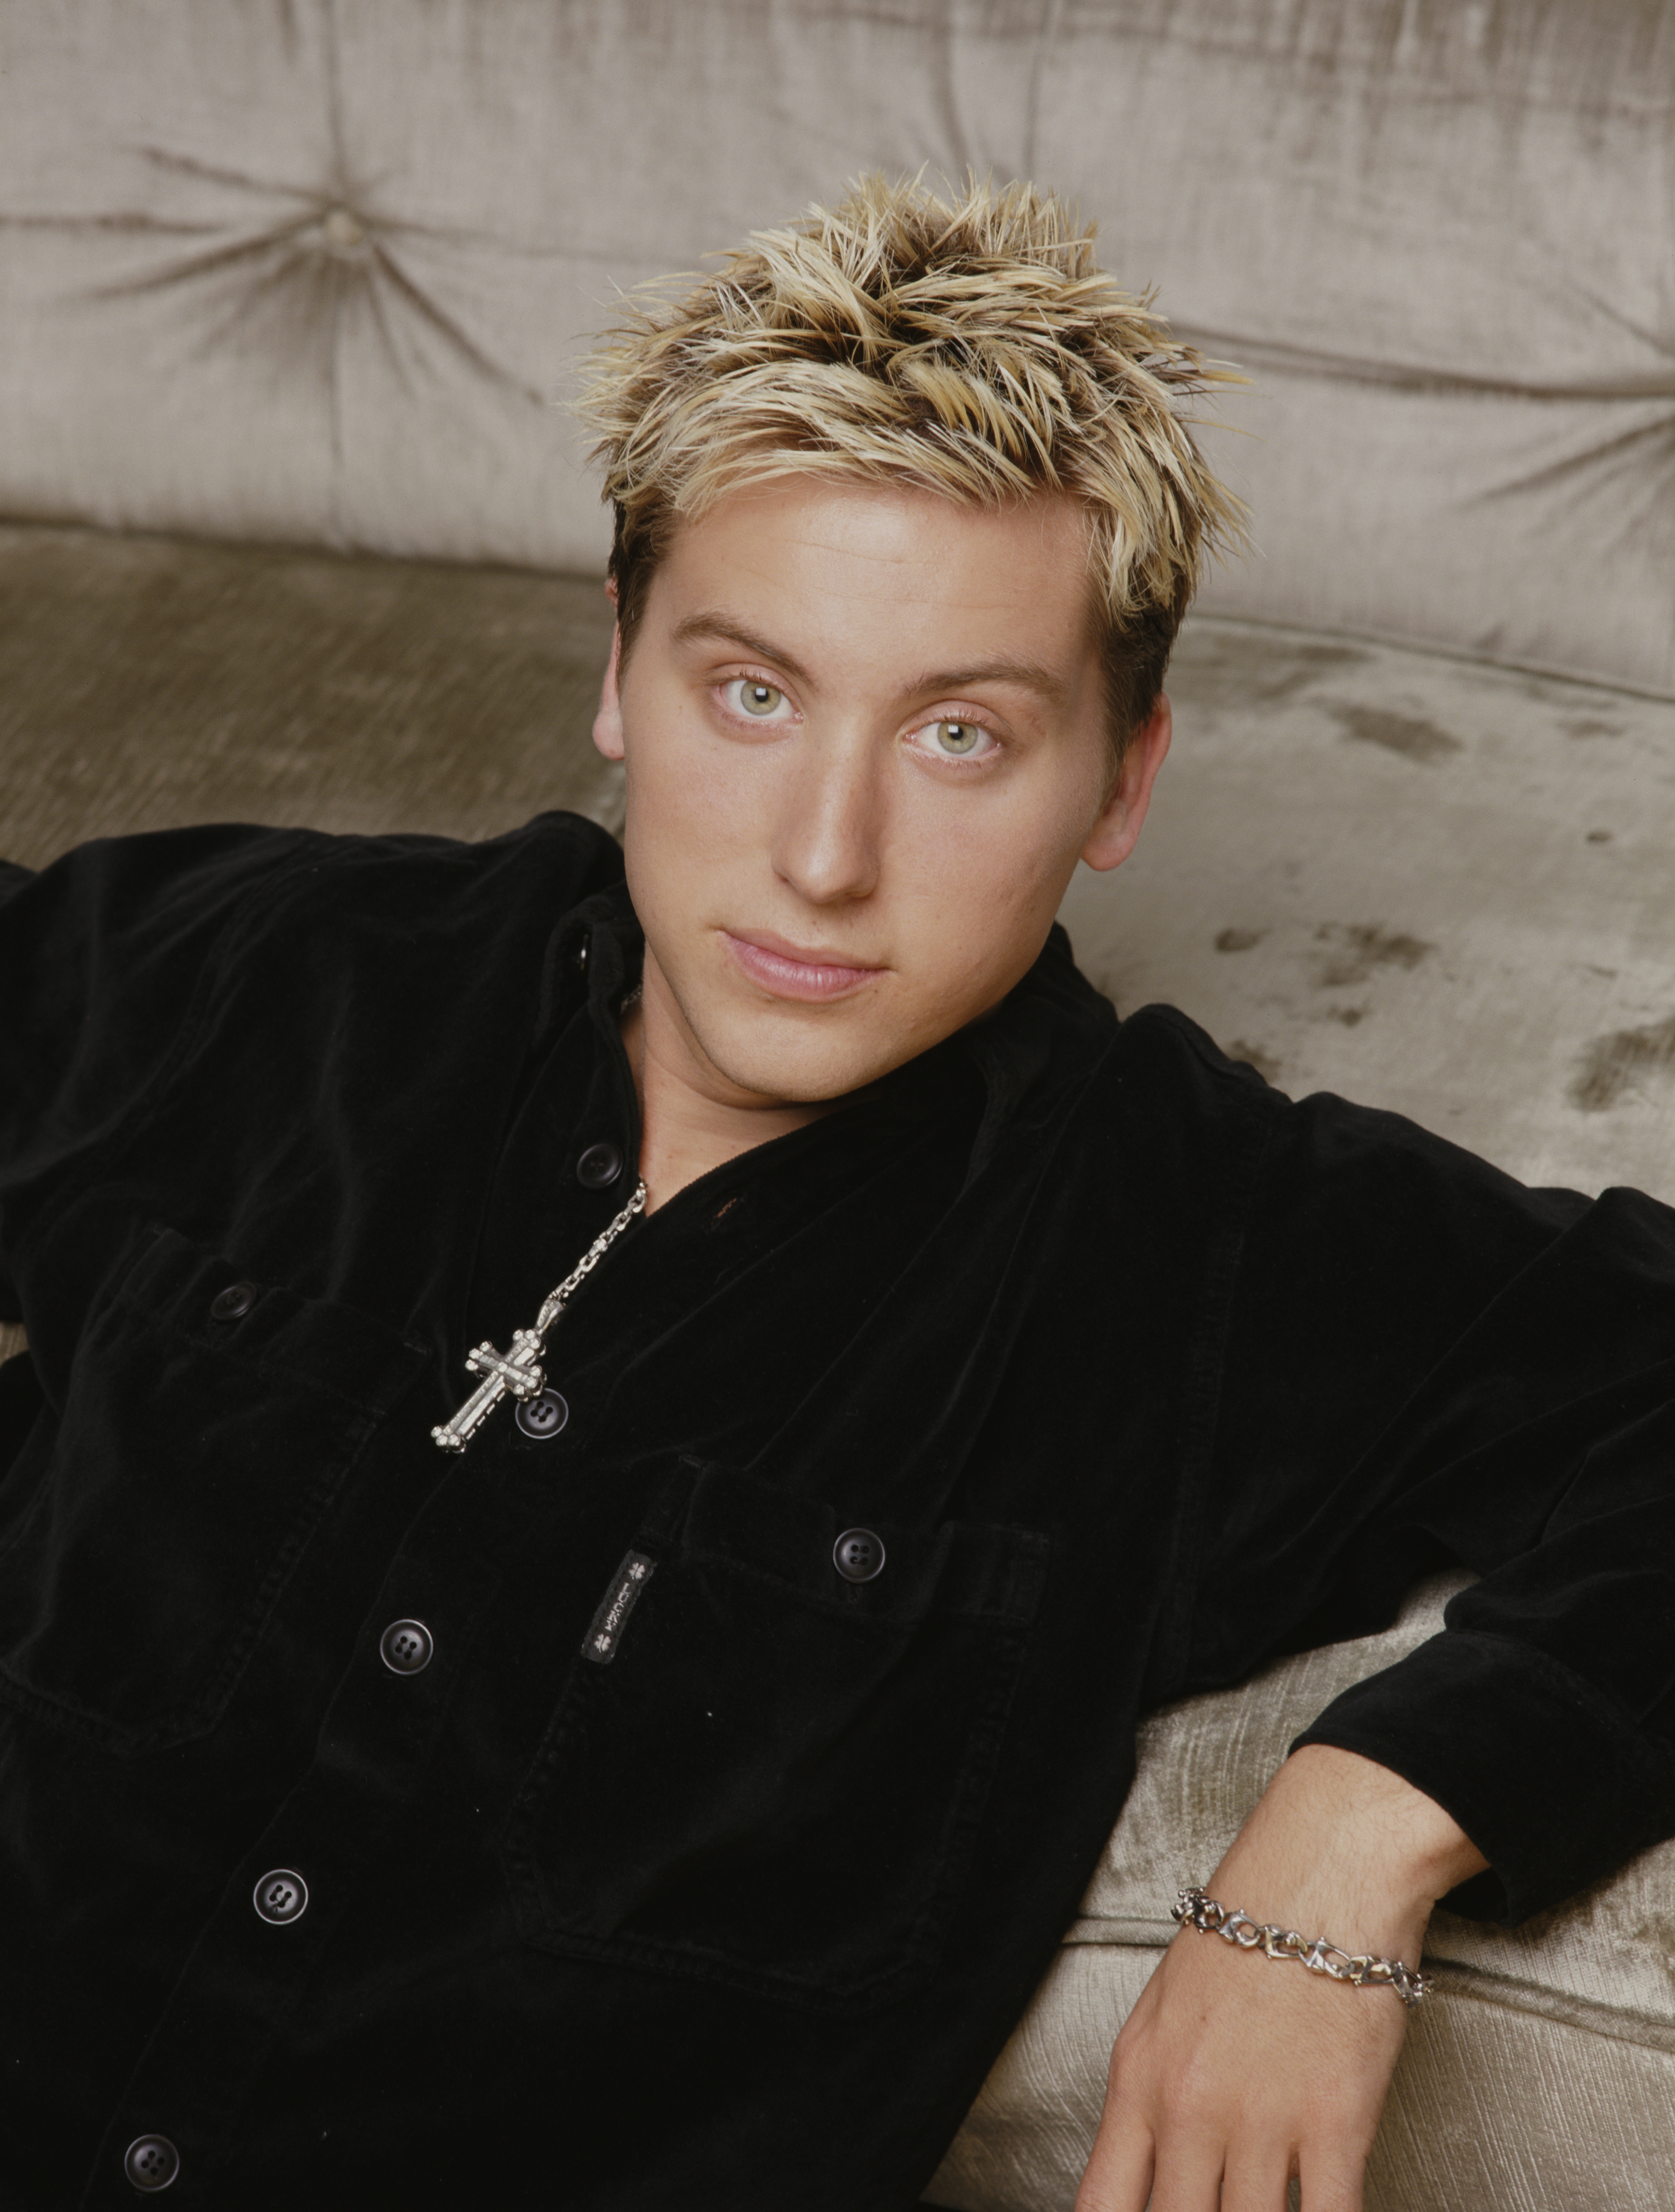 Lance Bass showing his spiked blonde-tipped hairstyle while lounging in a button-up top and silver jewelry